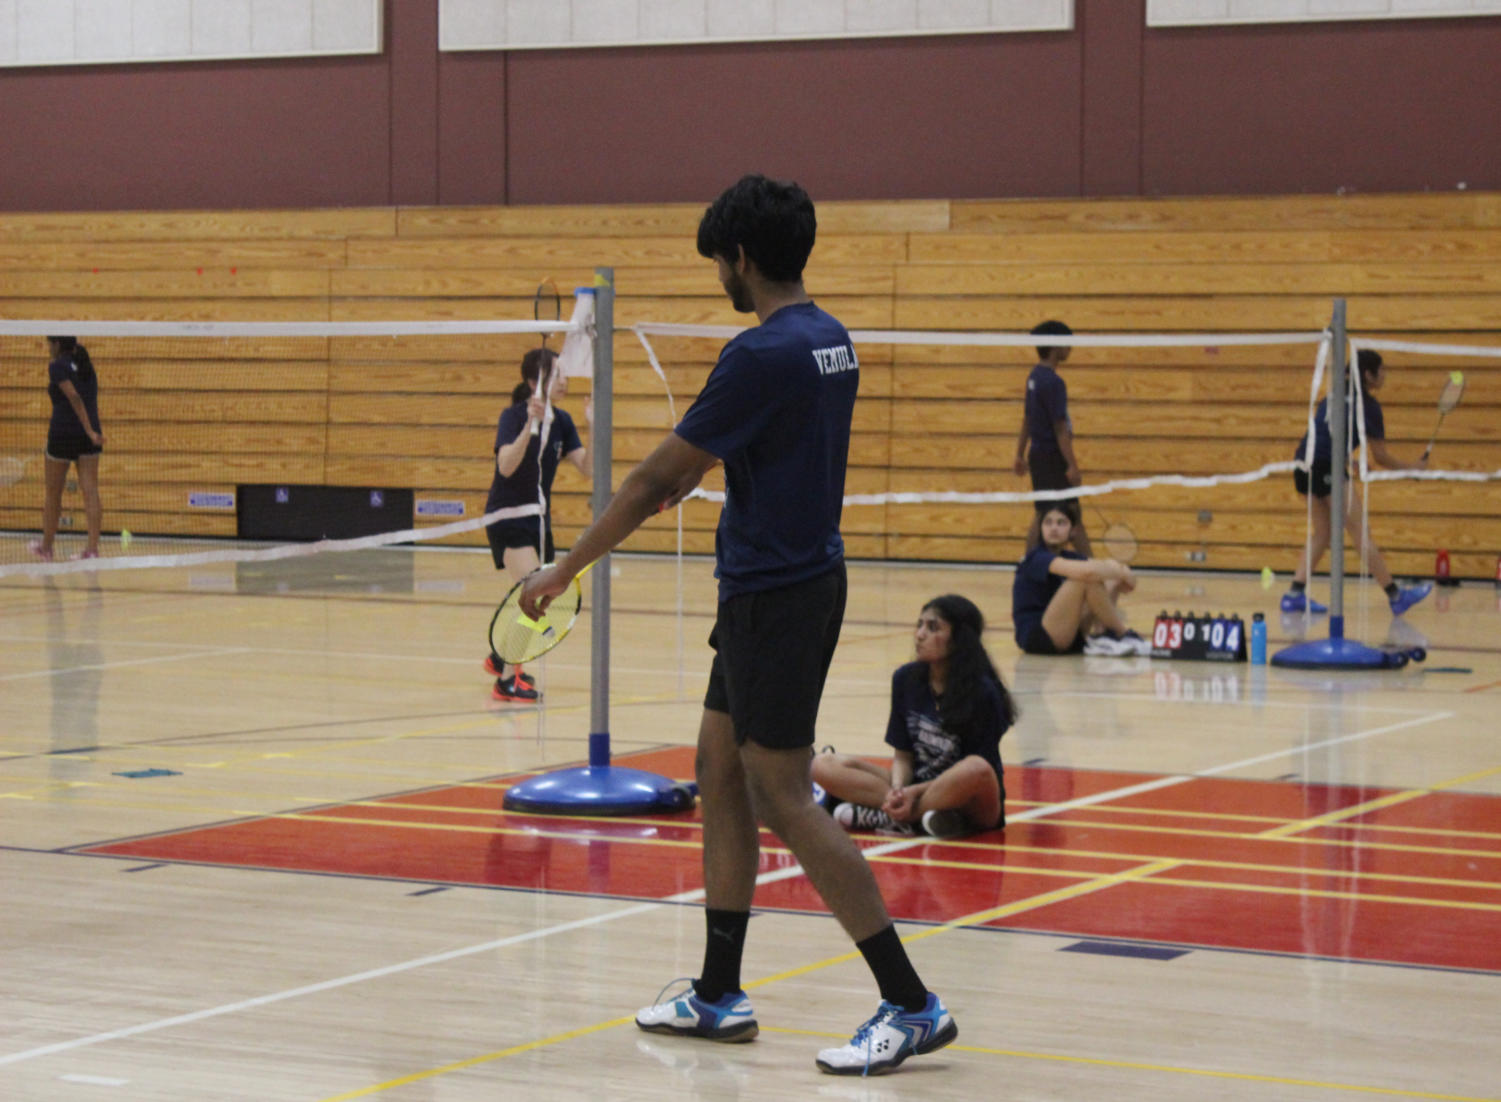 DVHS+badminton+team+receives+first+funding+from+school+district